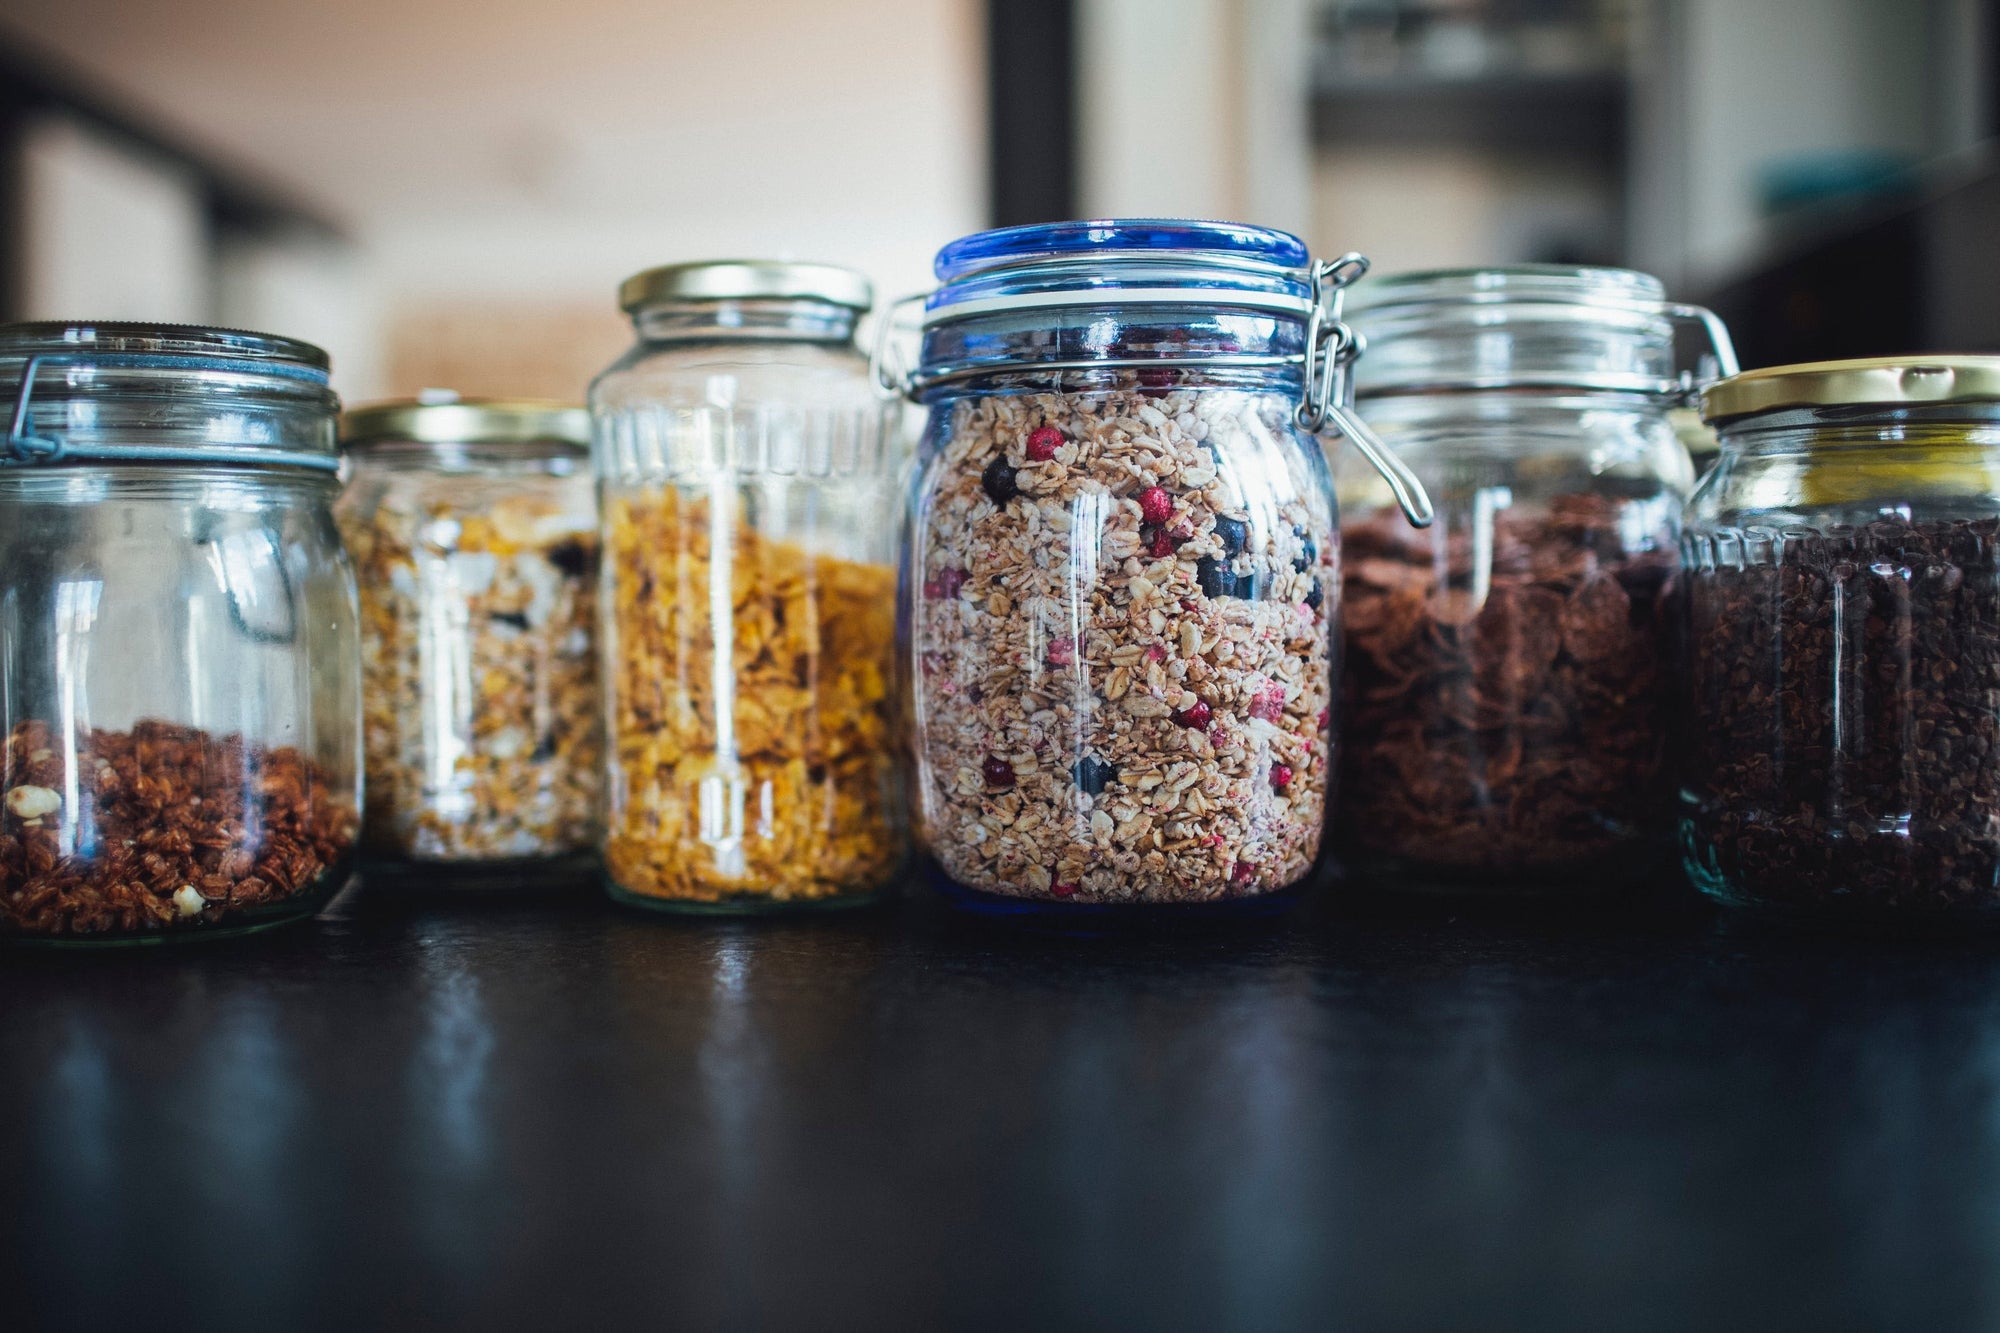 The Best Dry Food Storage Containers for Keeping Pantry Ingredients Fresh and Organized - Maria's Condo